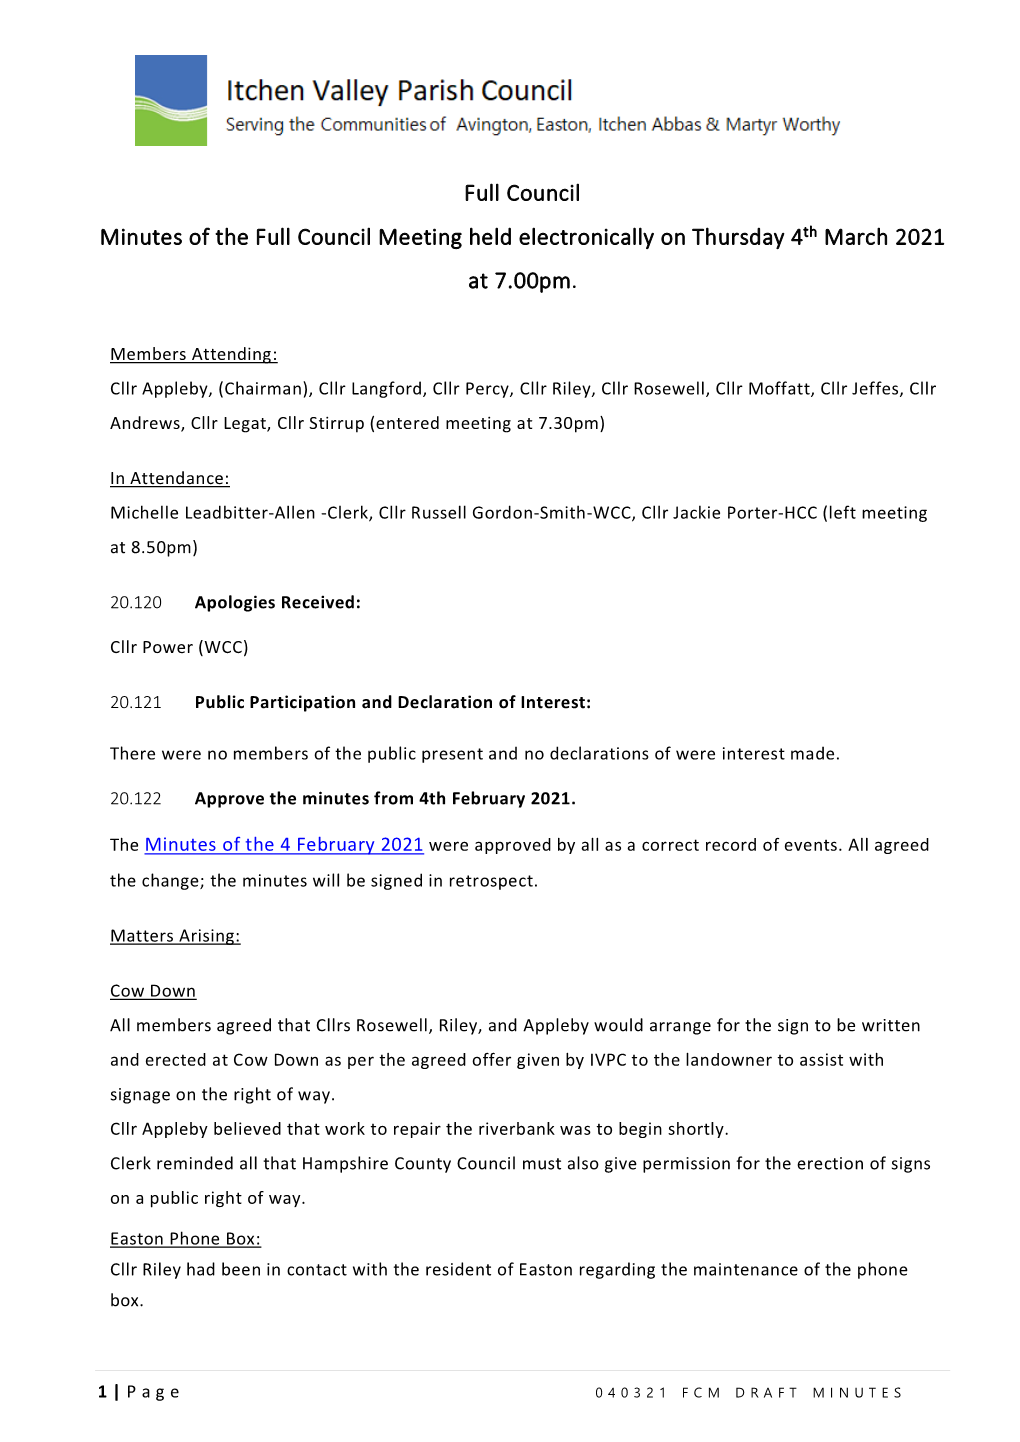 Full Council Meeting Minutes 4Th March 2021